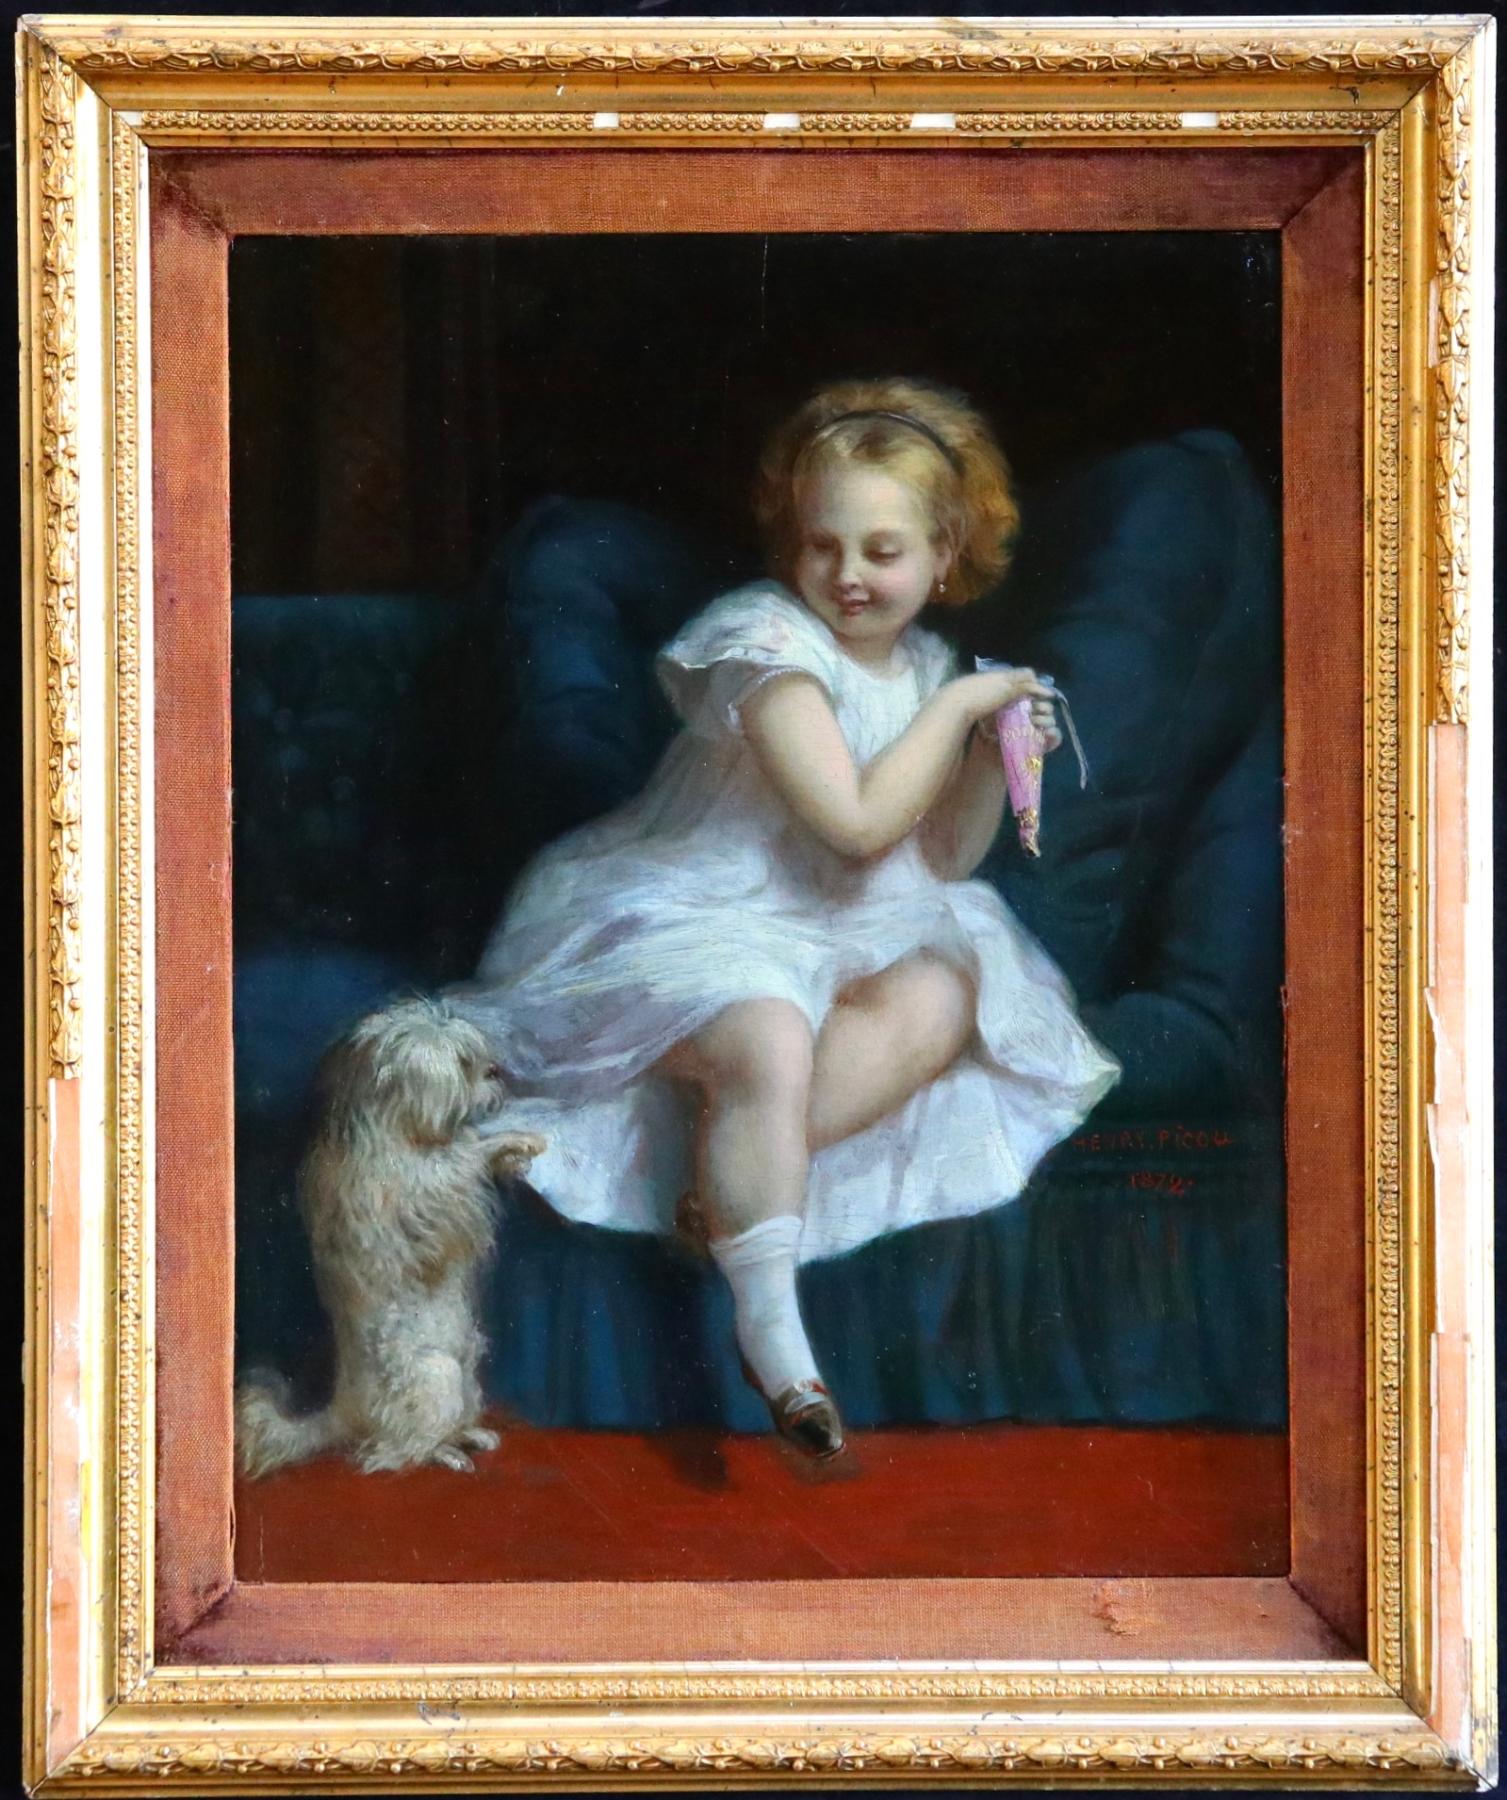 Bonbons - 19th Century Romantic Oil, Girl with Dog in Interior by Henri Picou - Painting by Henri-Pierre Picou